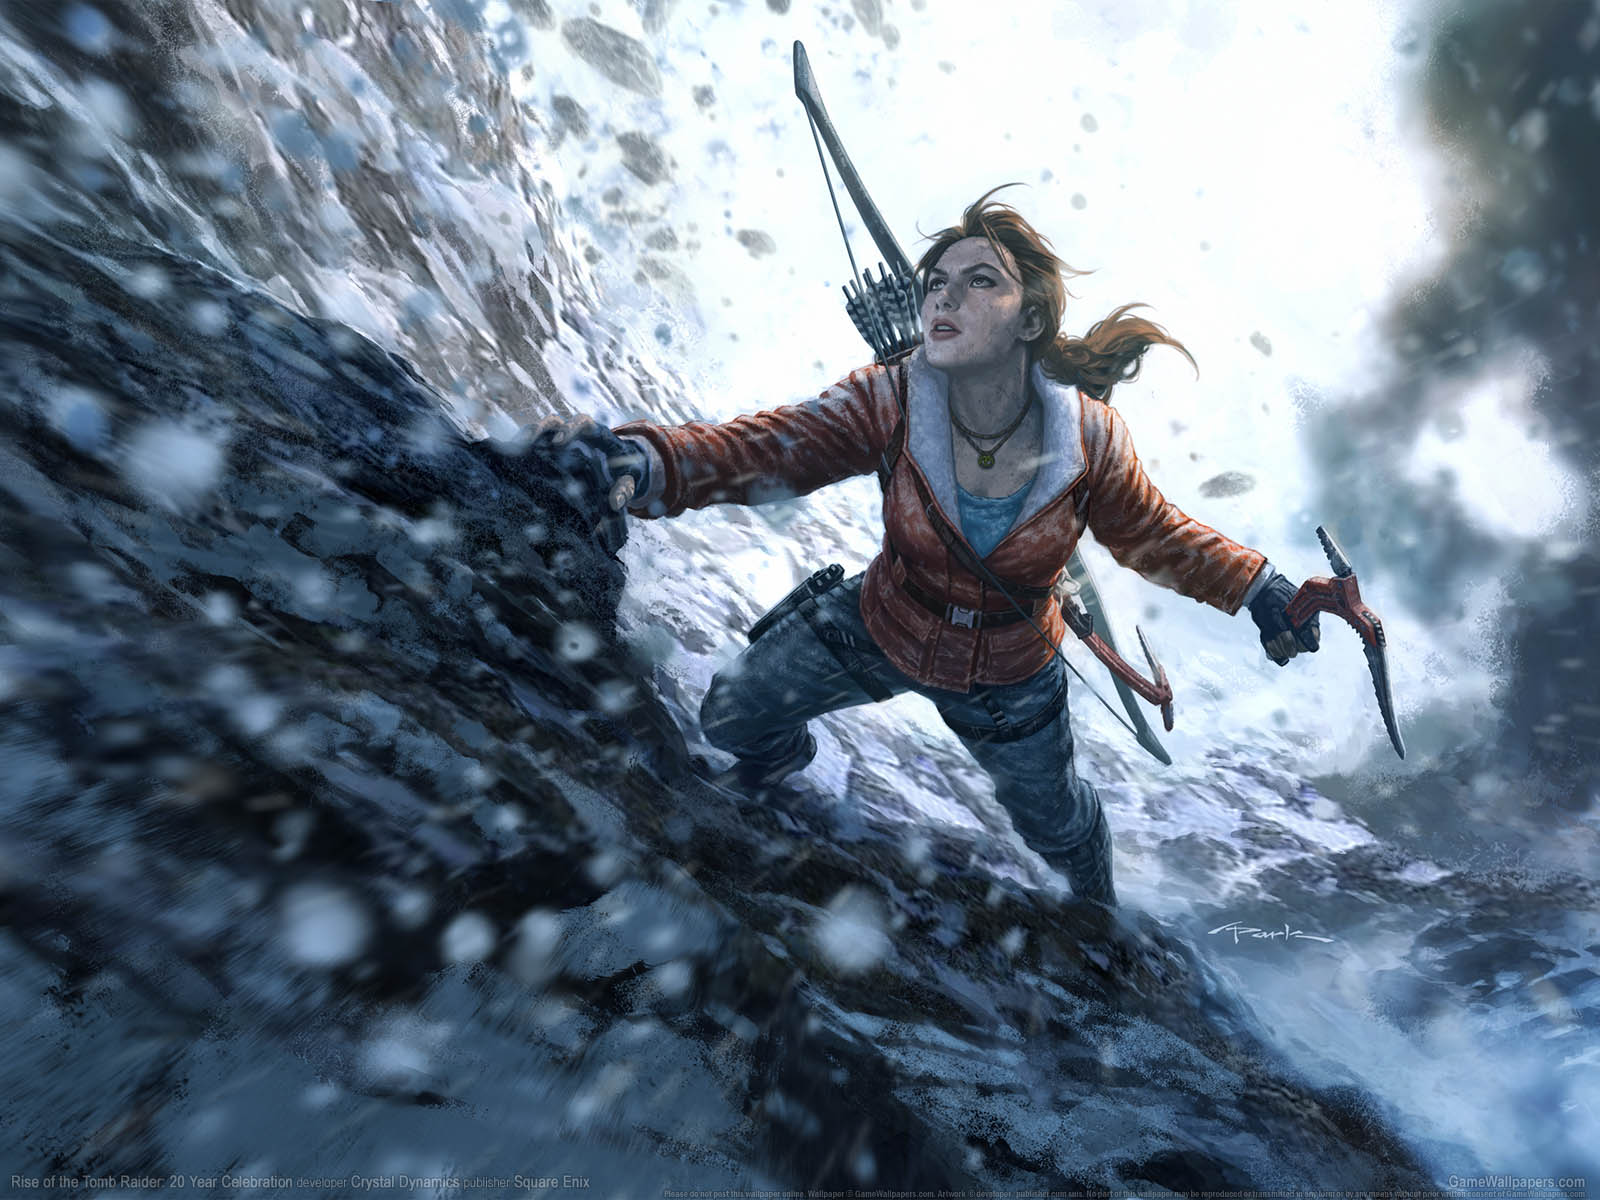 Rise of the Tomb Raider%253A 20 Year Celebration wallpaper 02 1600x1200